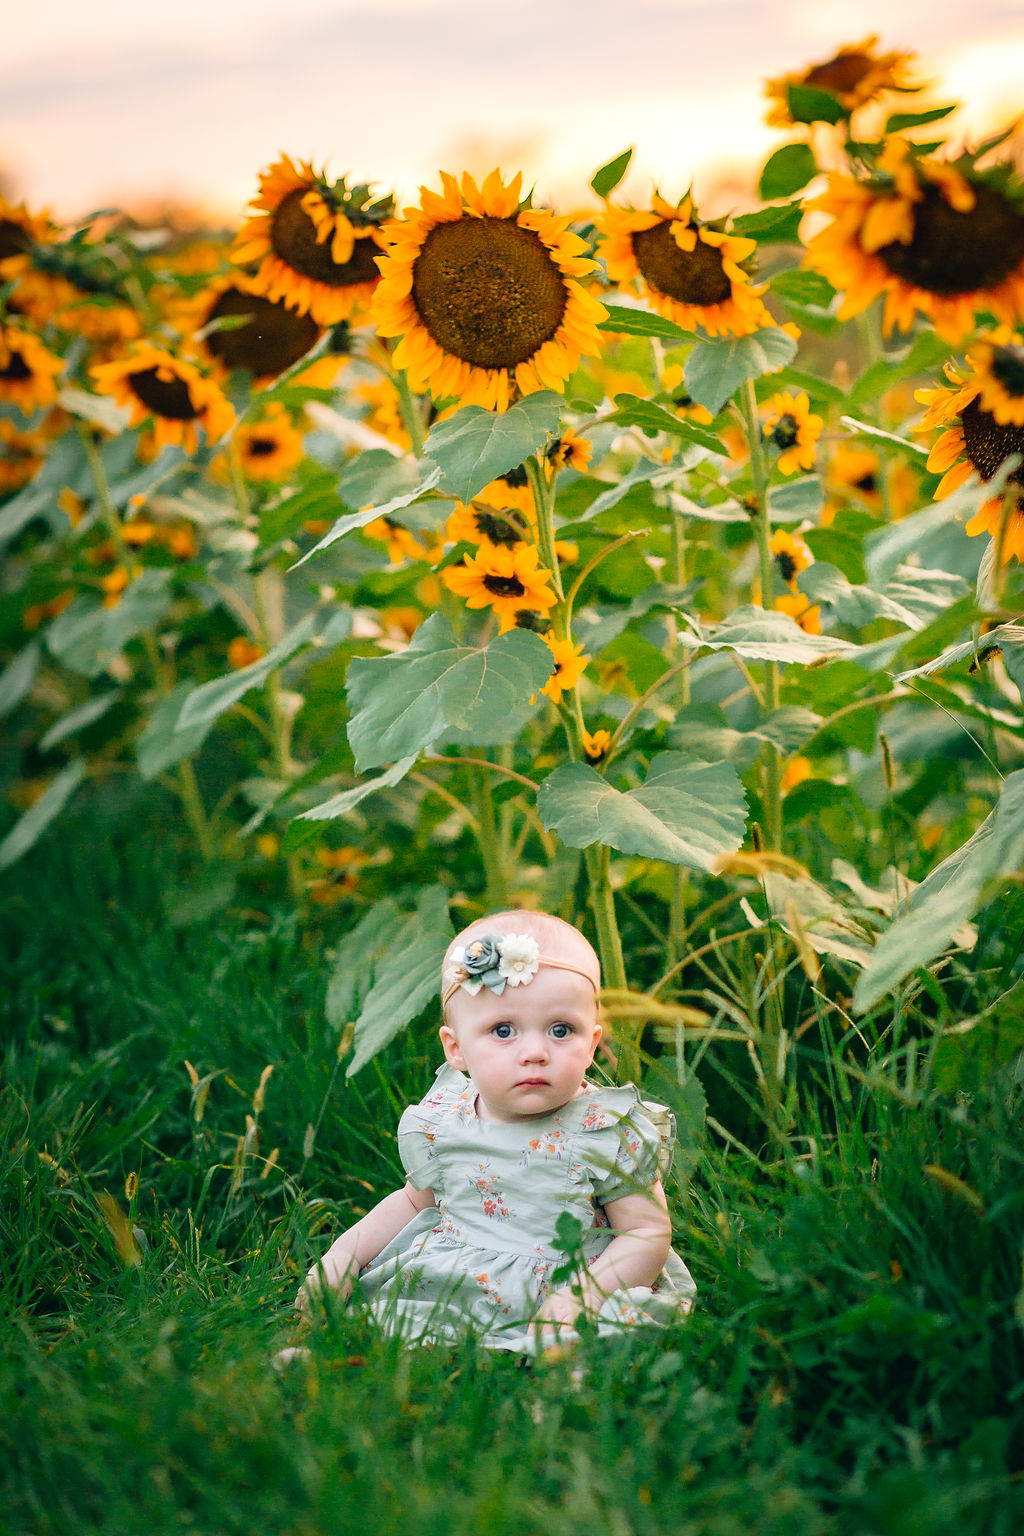 A young toddler girl in a blue dress and headband sits in the grass on the edge of a sunflower field at a staunton va pumpkin patch